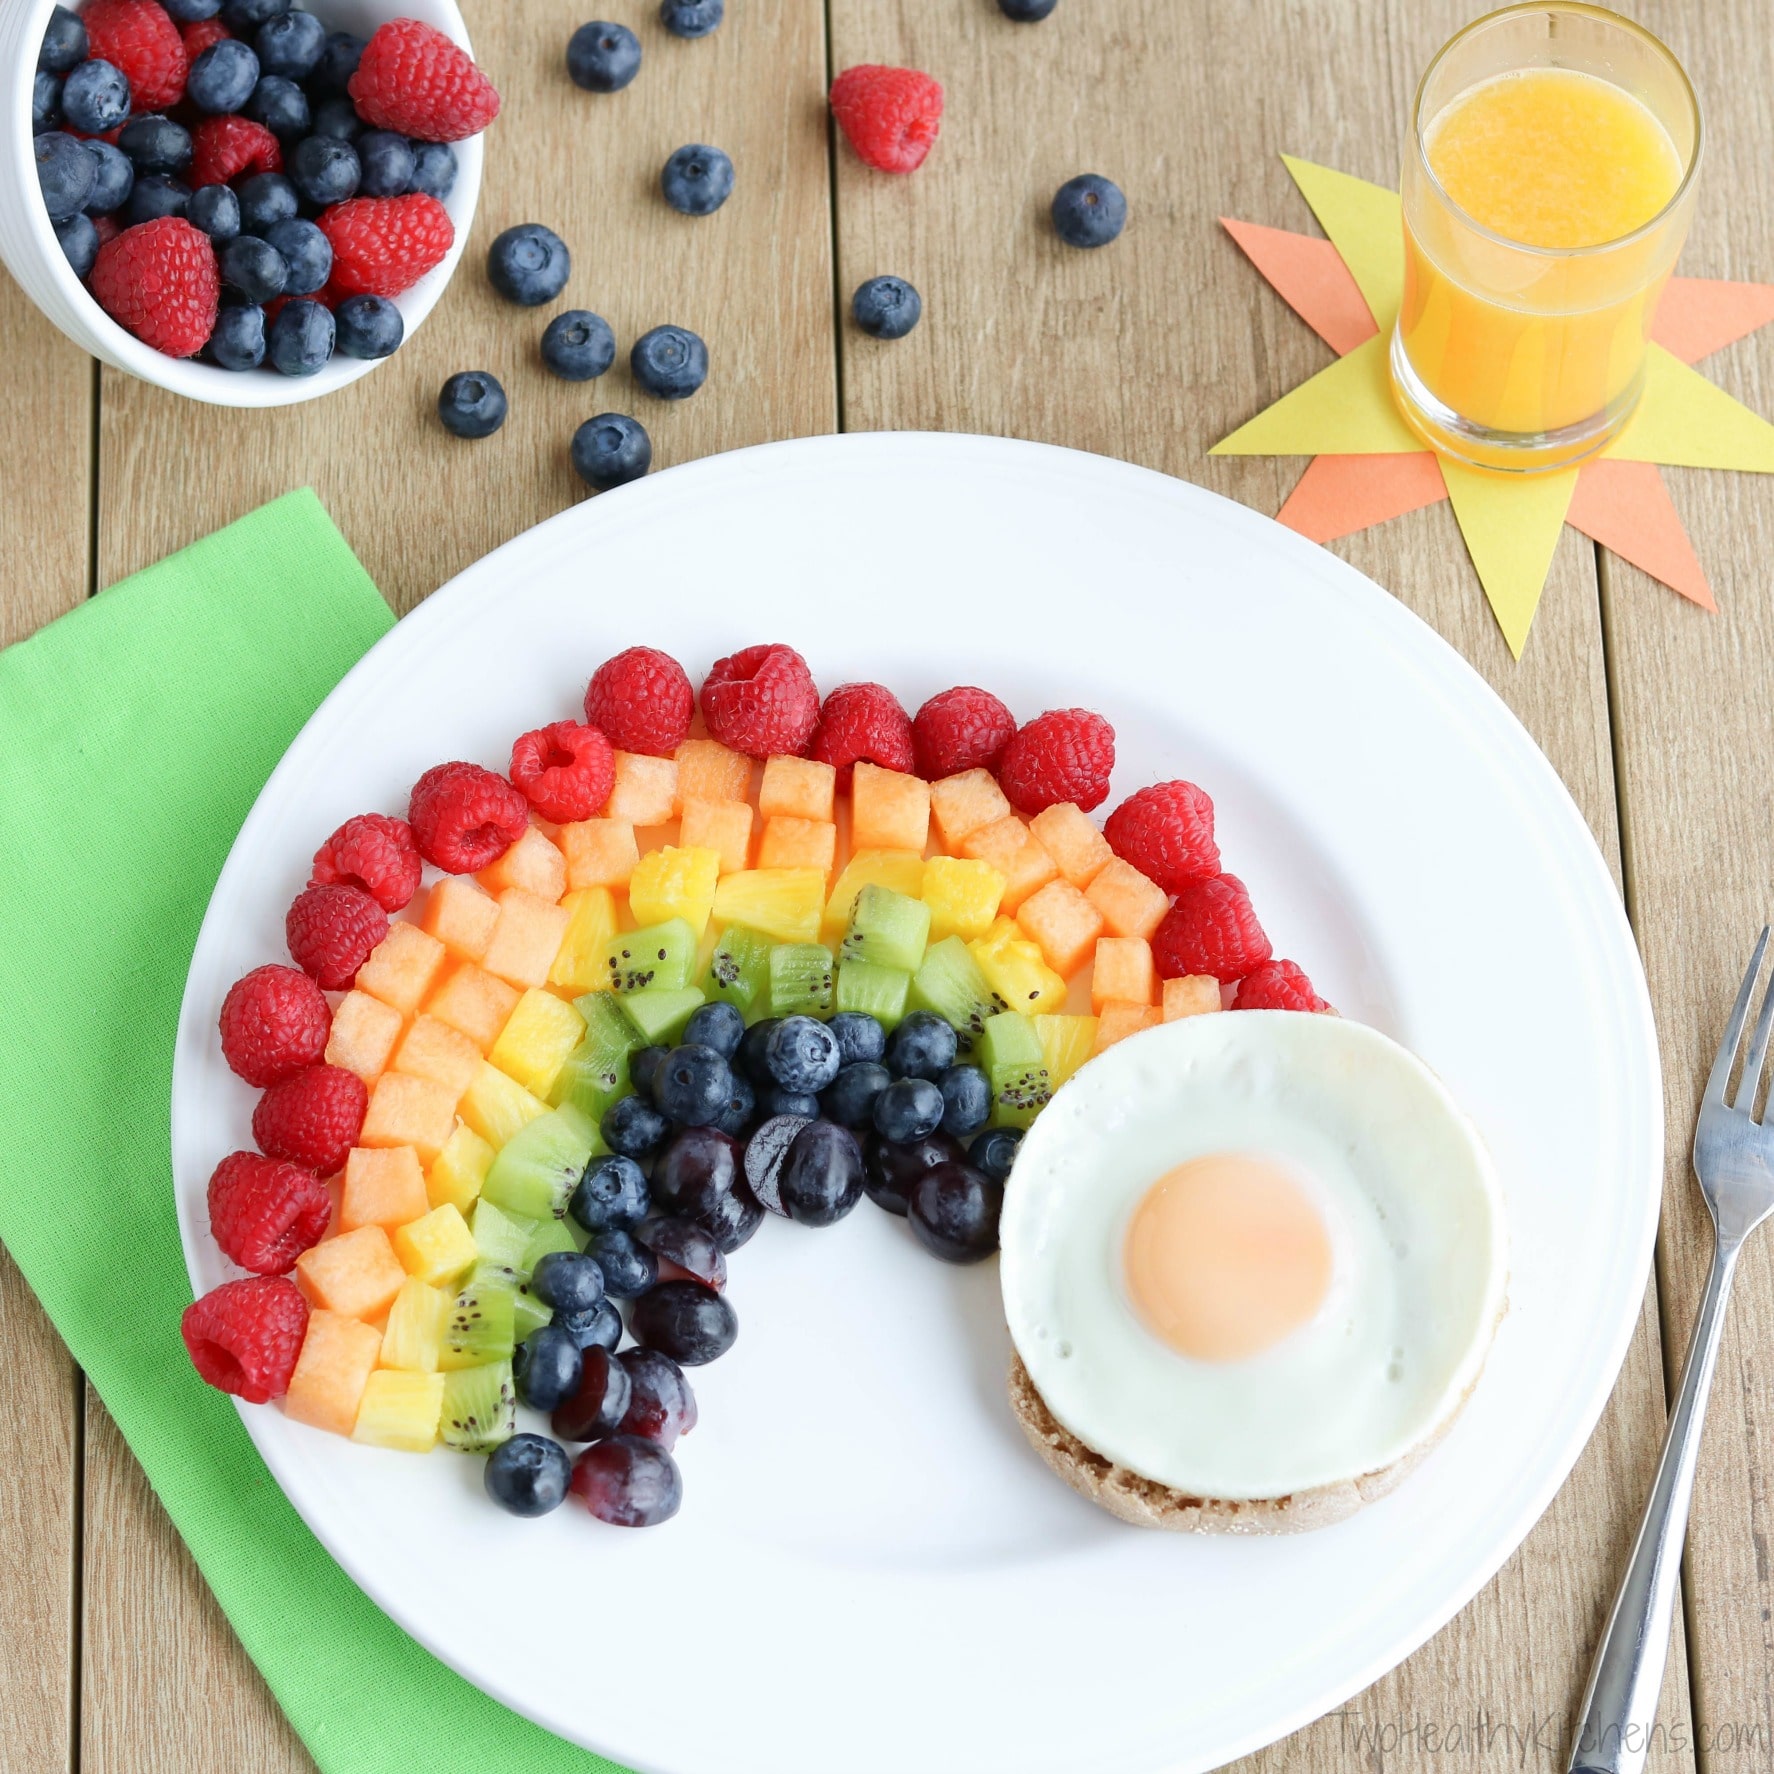 Fruit rainbow on white plate with egg-topped English muffin, green napkin, fork, OJ on sunshine paper and bowl of berries.